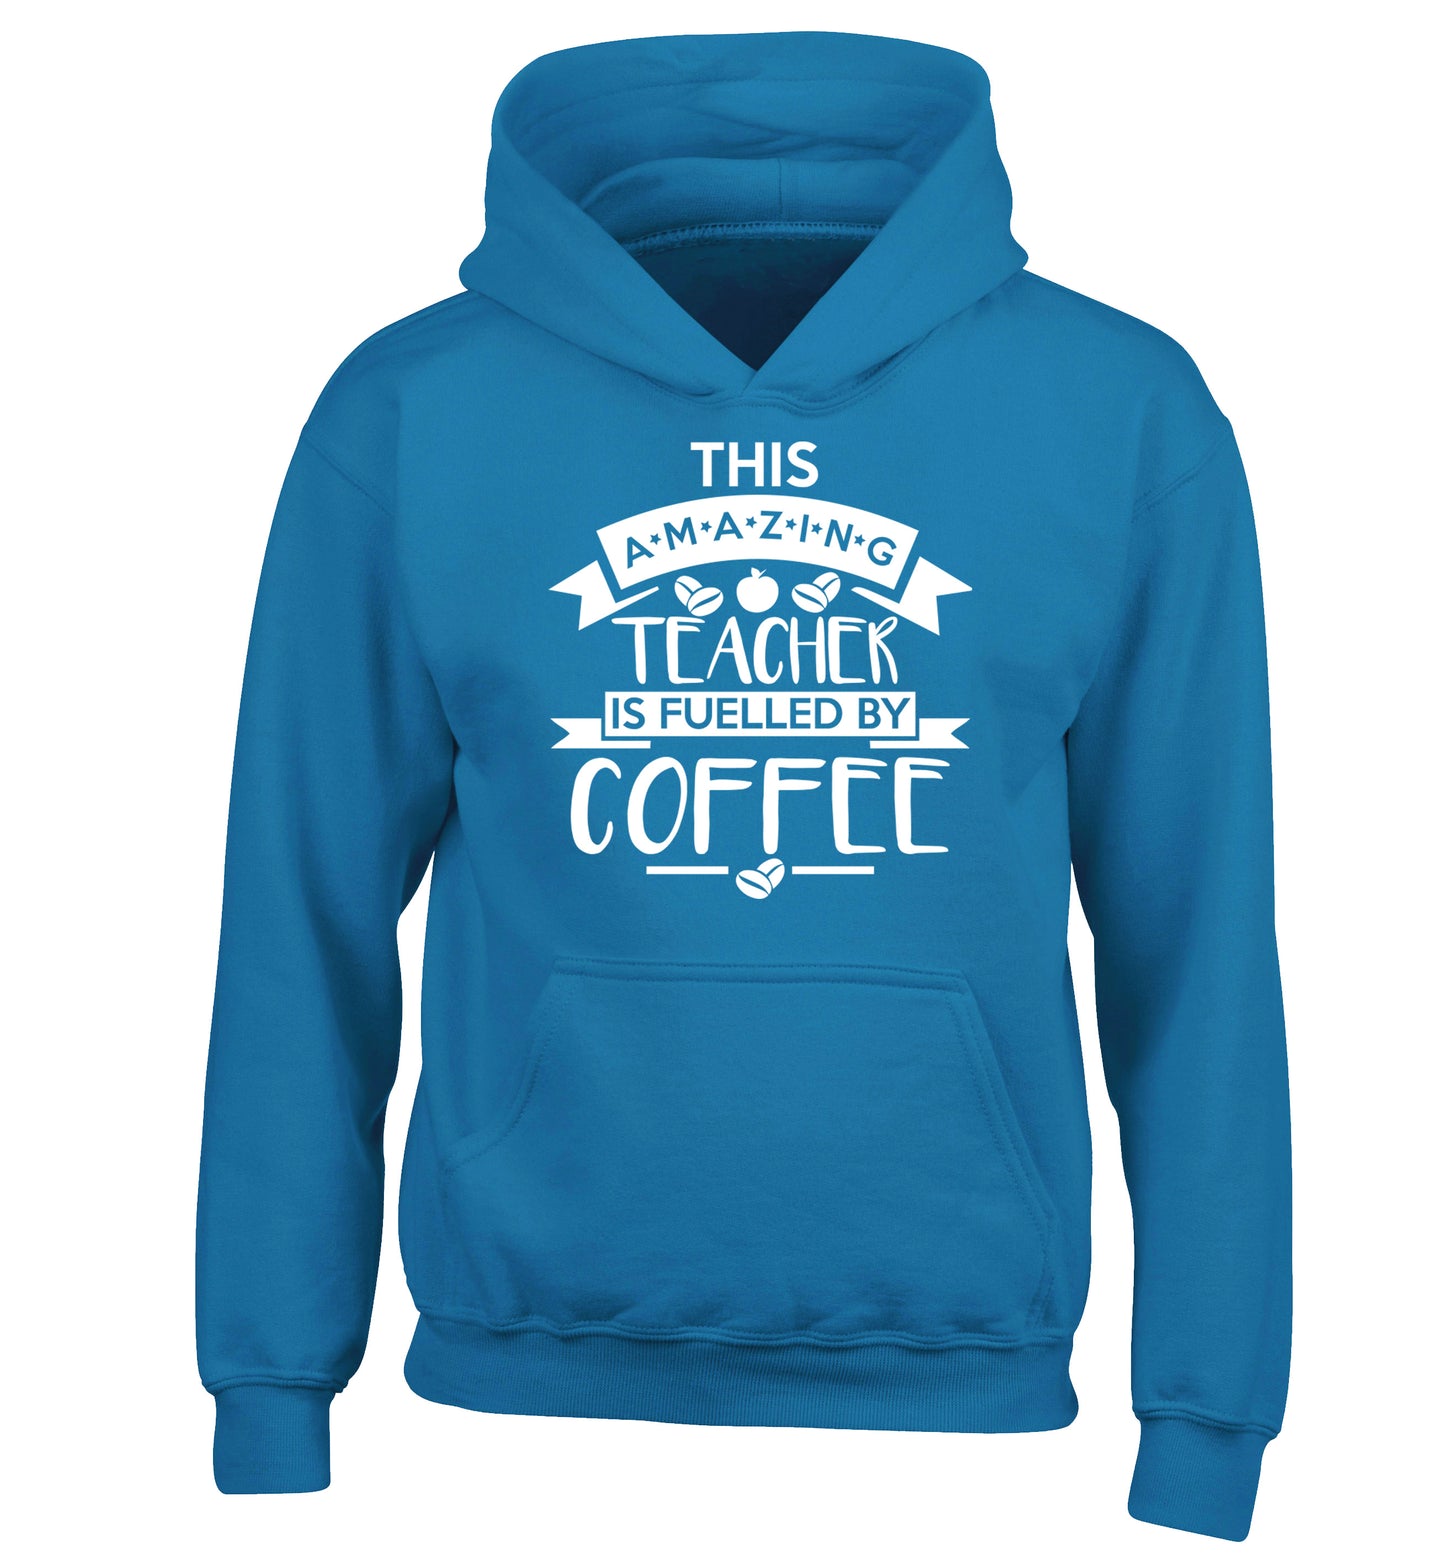 This amazing teacher is fuelled by coffee children's blue hoodie 12-13 Years